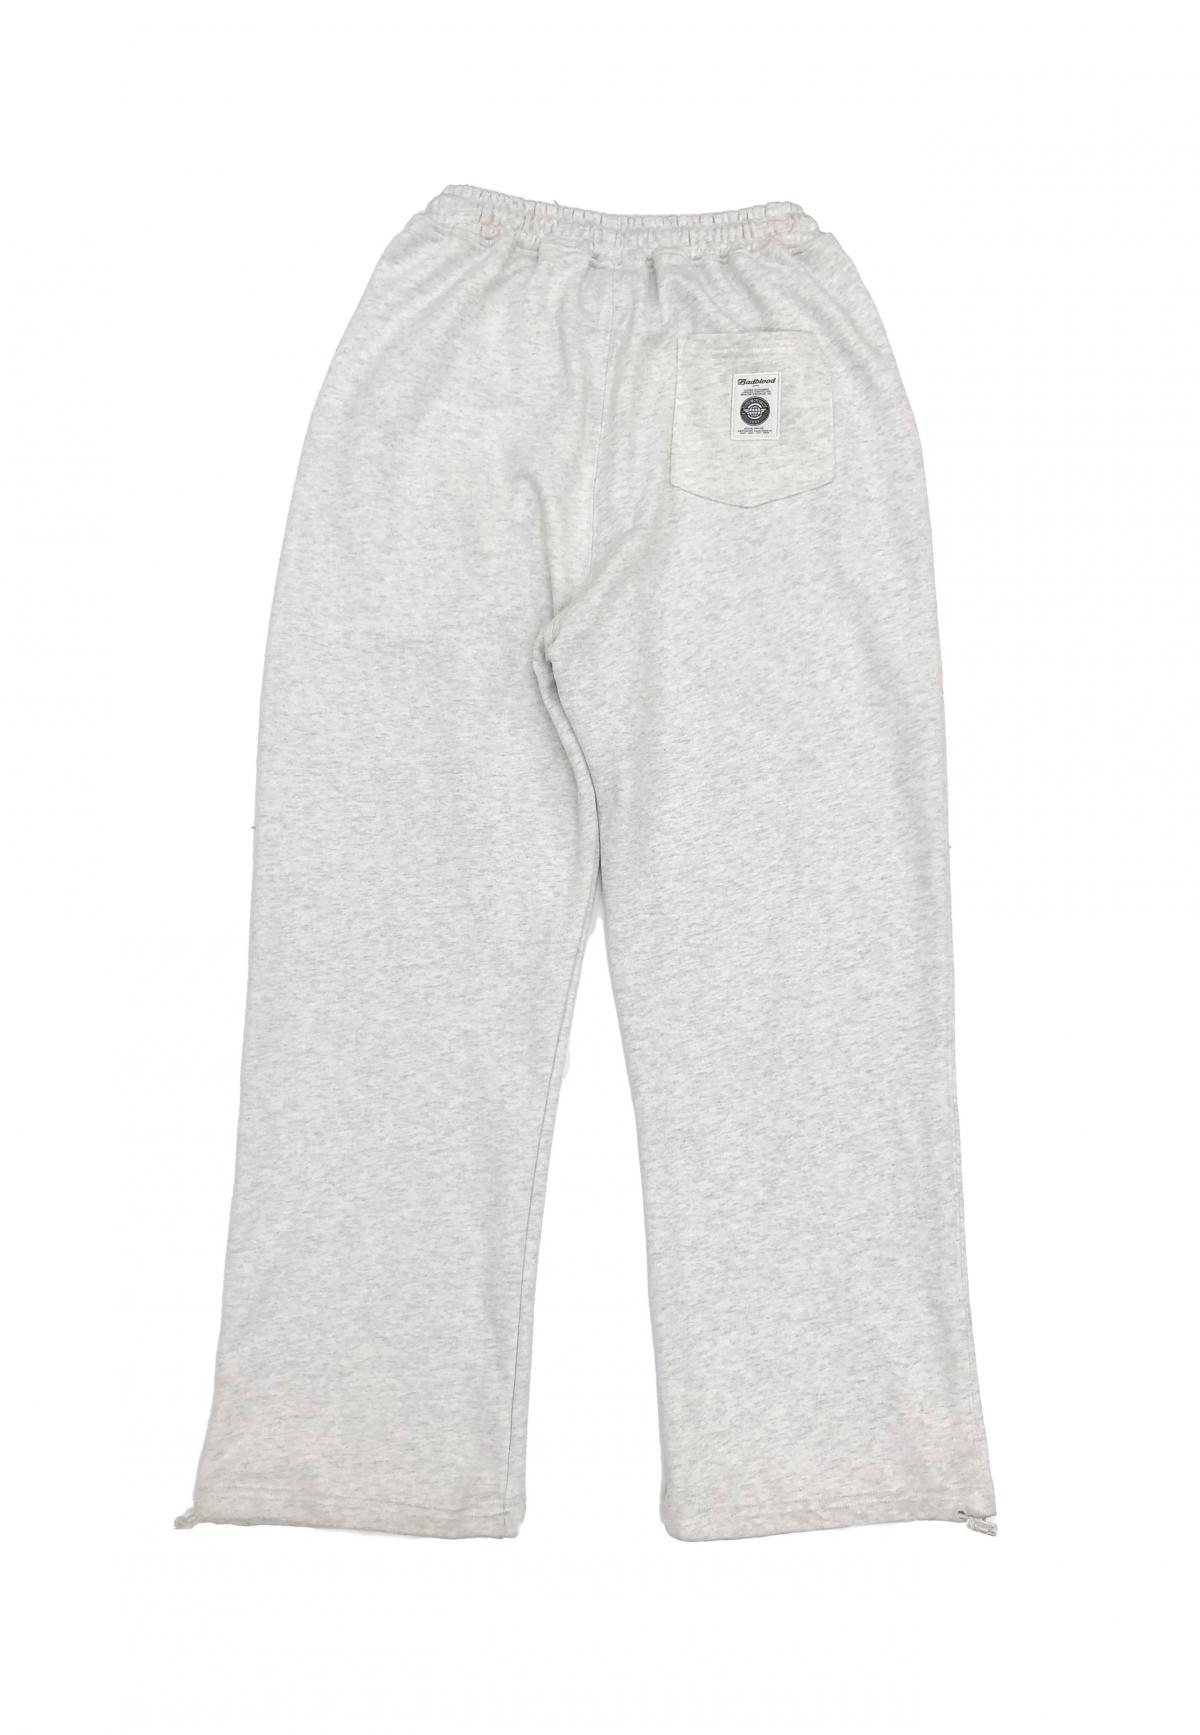 Unisex's French Terry Sweatpants JS0008 #1